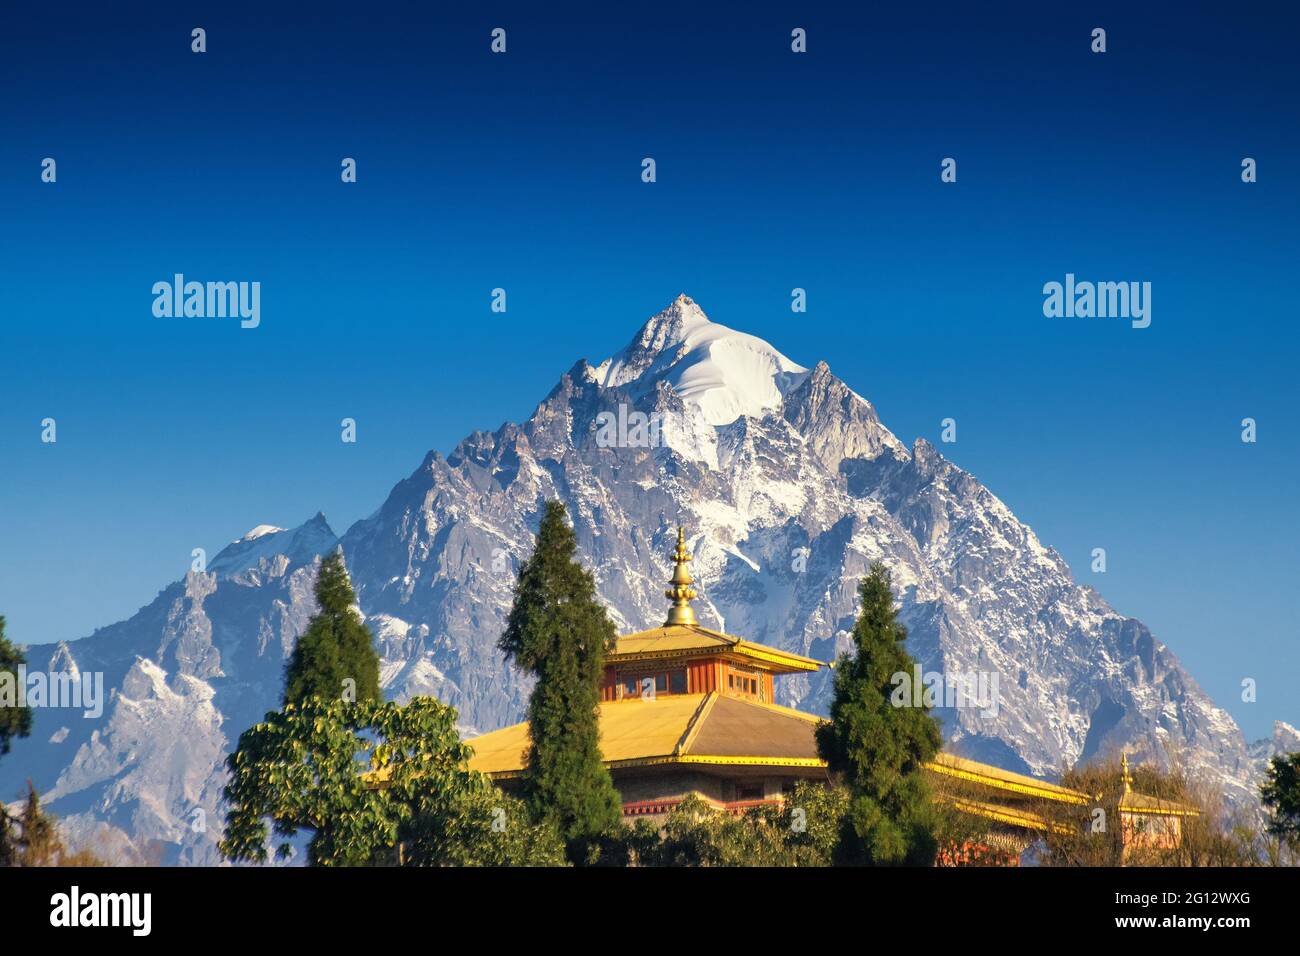 Mount Pandim, 6691 mtrs, 21952 feet high, one of the highest peaks of Himalayan Mountain range - with top of Rinchenpong Monastery in foreground. Stock Photo